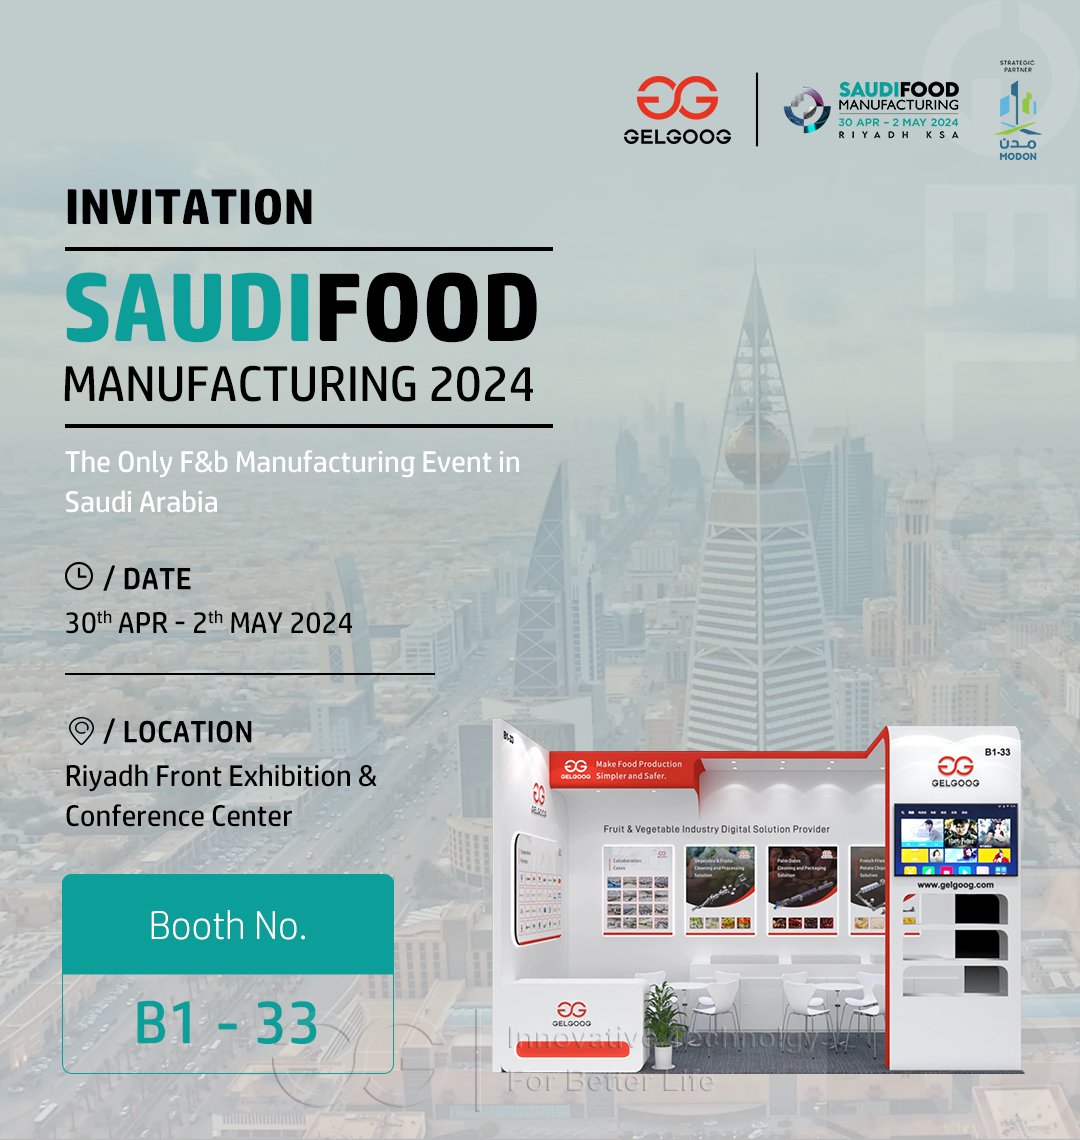 GELGOOG will participate in the 2024 SAUDIFOOD MANUFACTURING exhibition